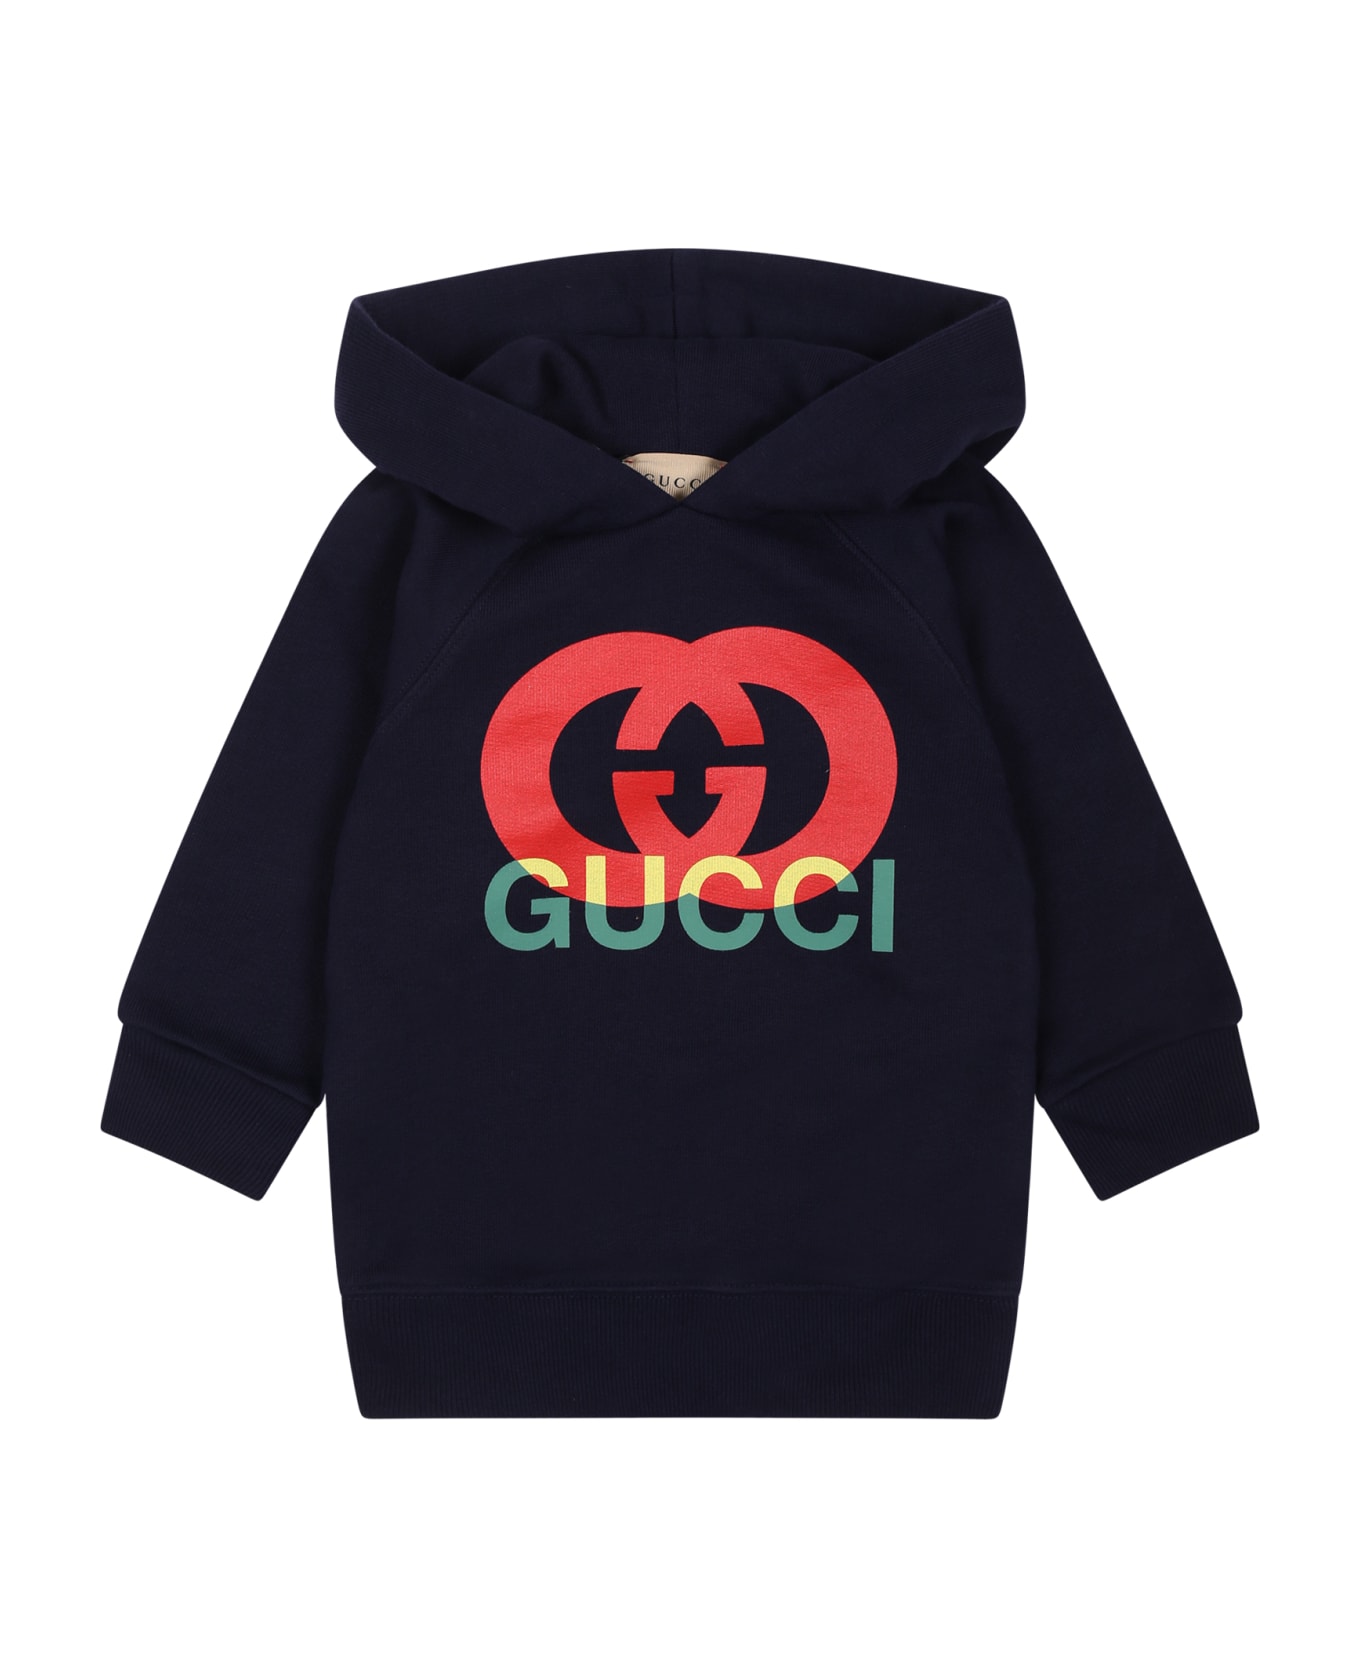 Gucci Blue Sweatshirt With Gg Print For Baby - Blue